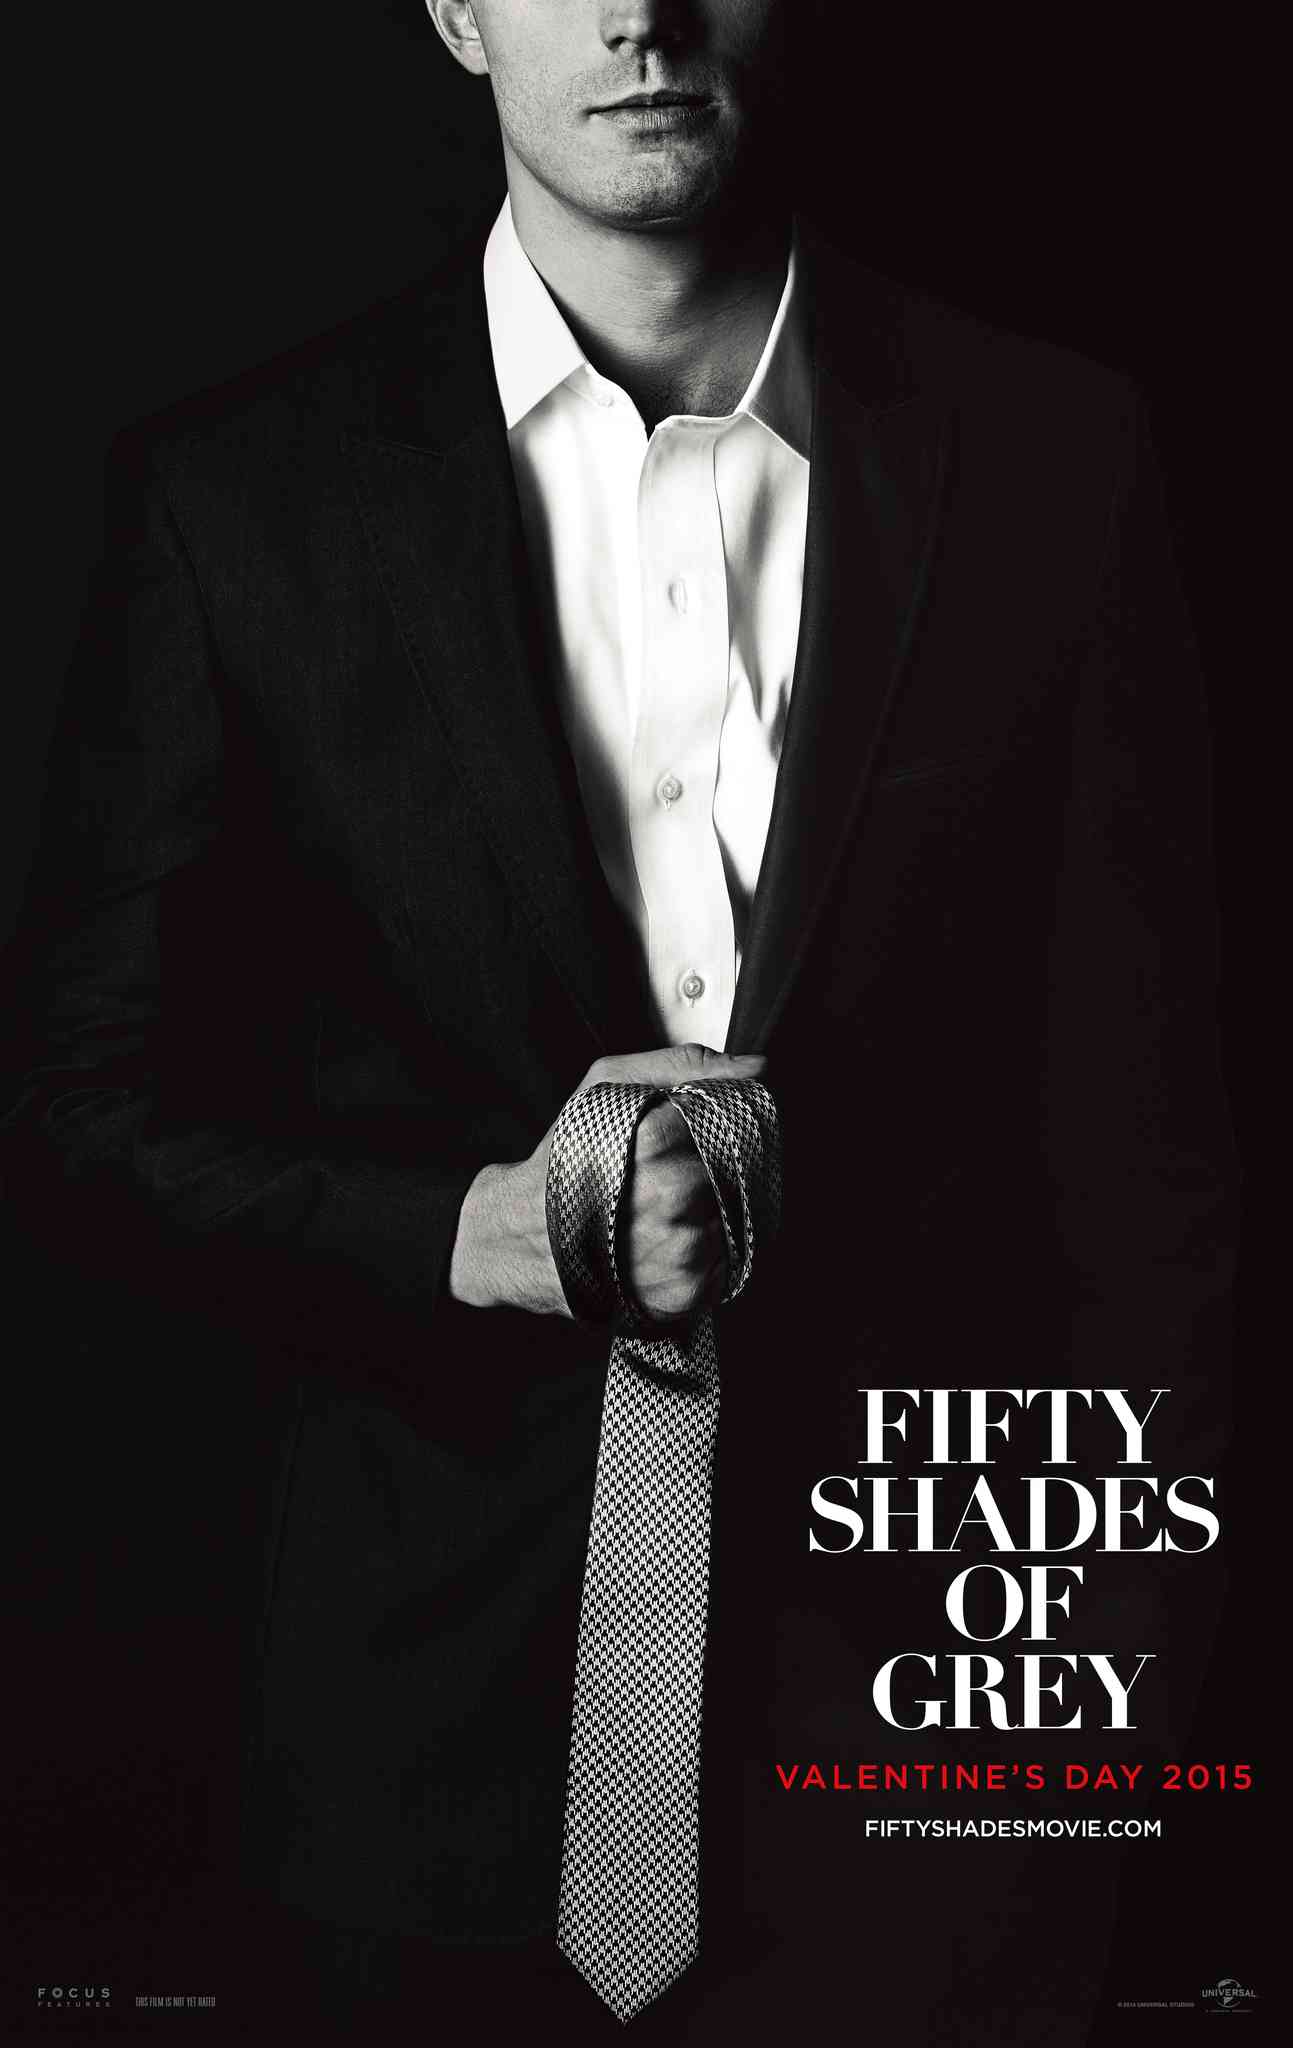 Fifty Shades Of Grey (2015) [Romance]